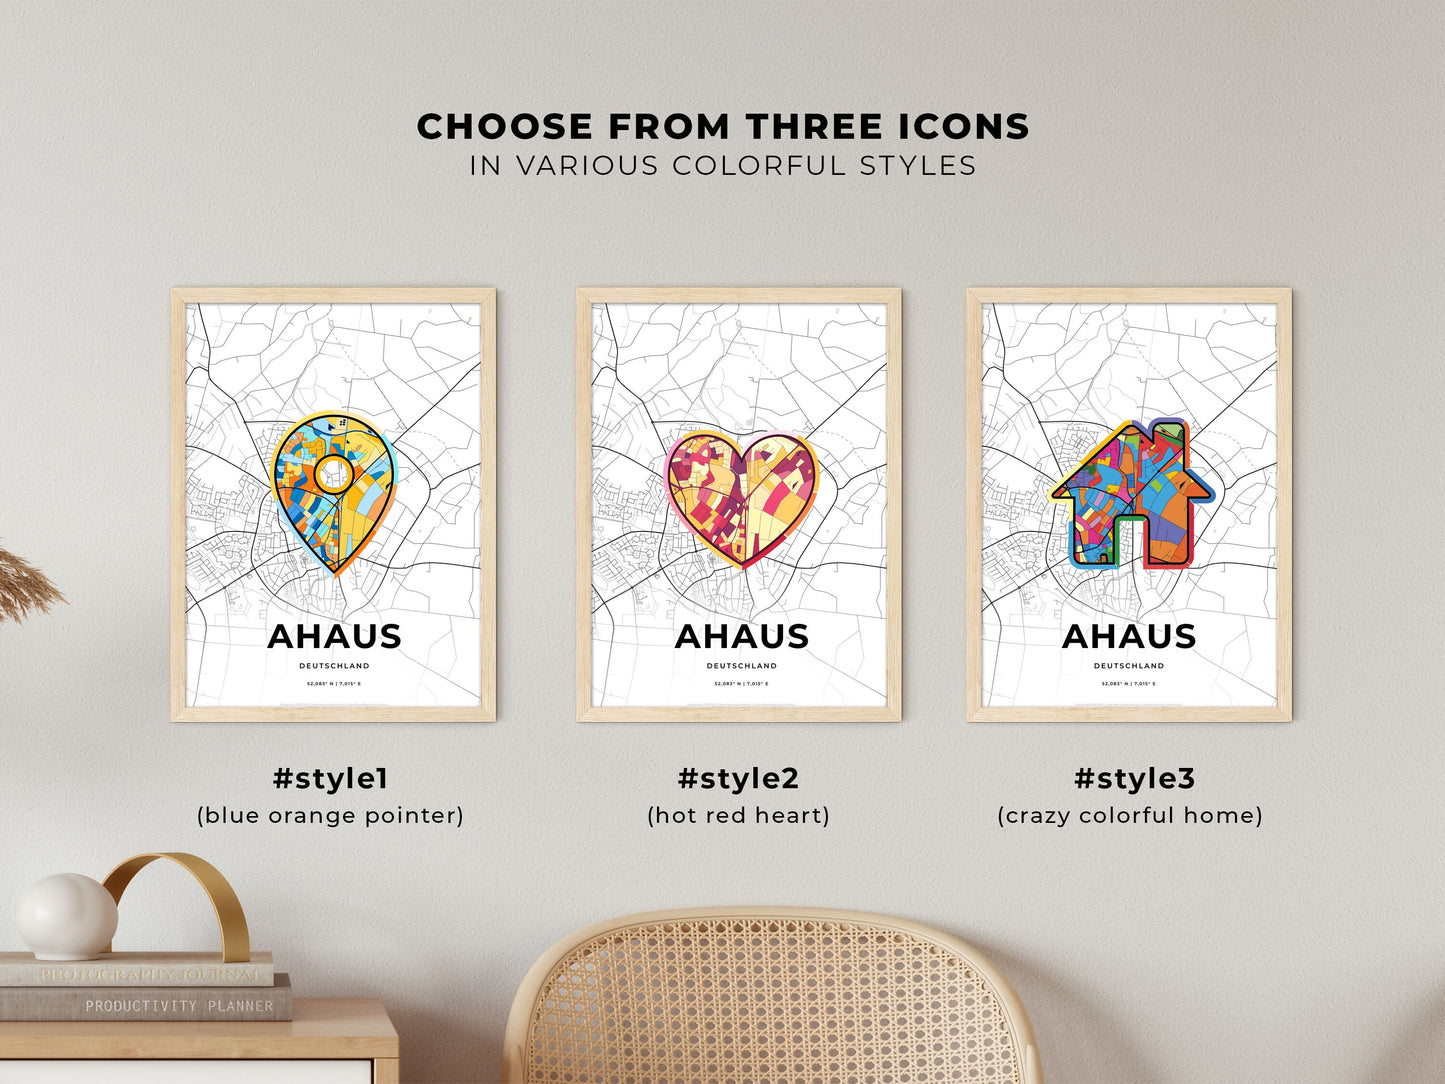 AHAUS GERMANY minimal art map with a colorful icon. Where it all began, Couple map gift.